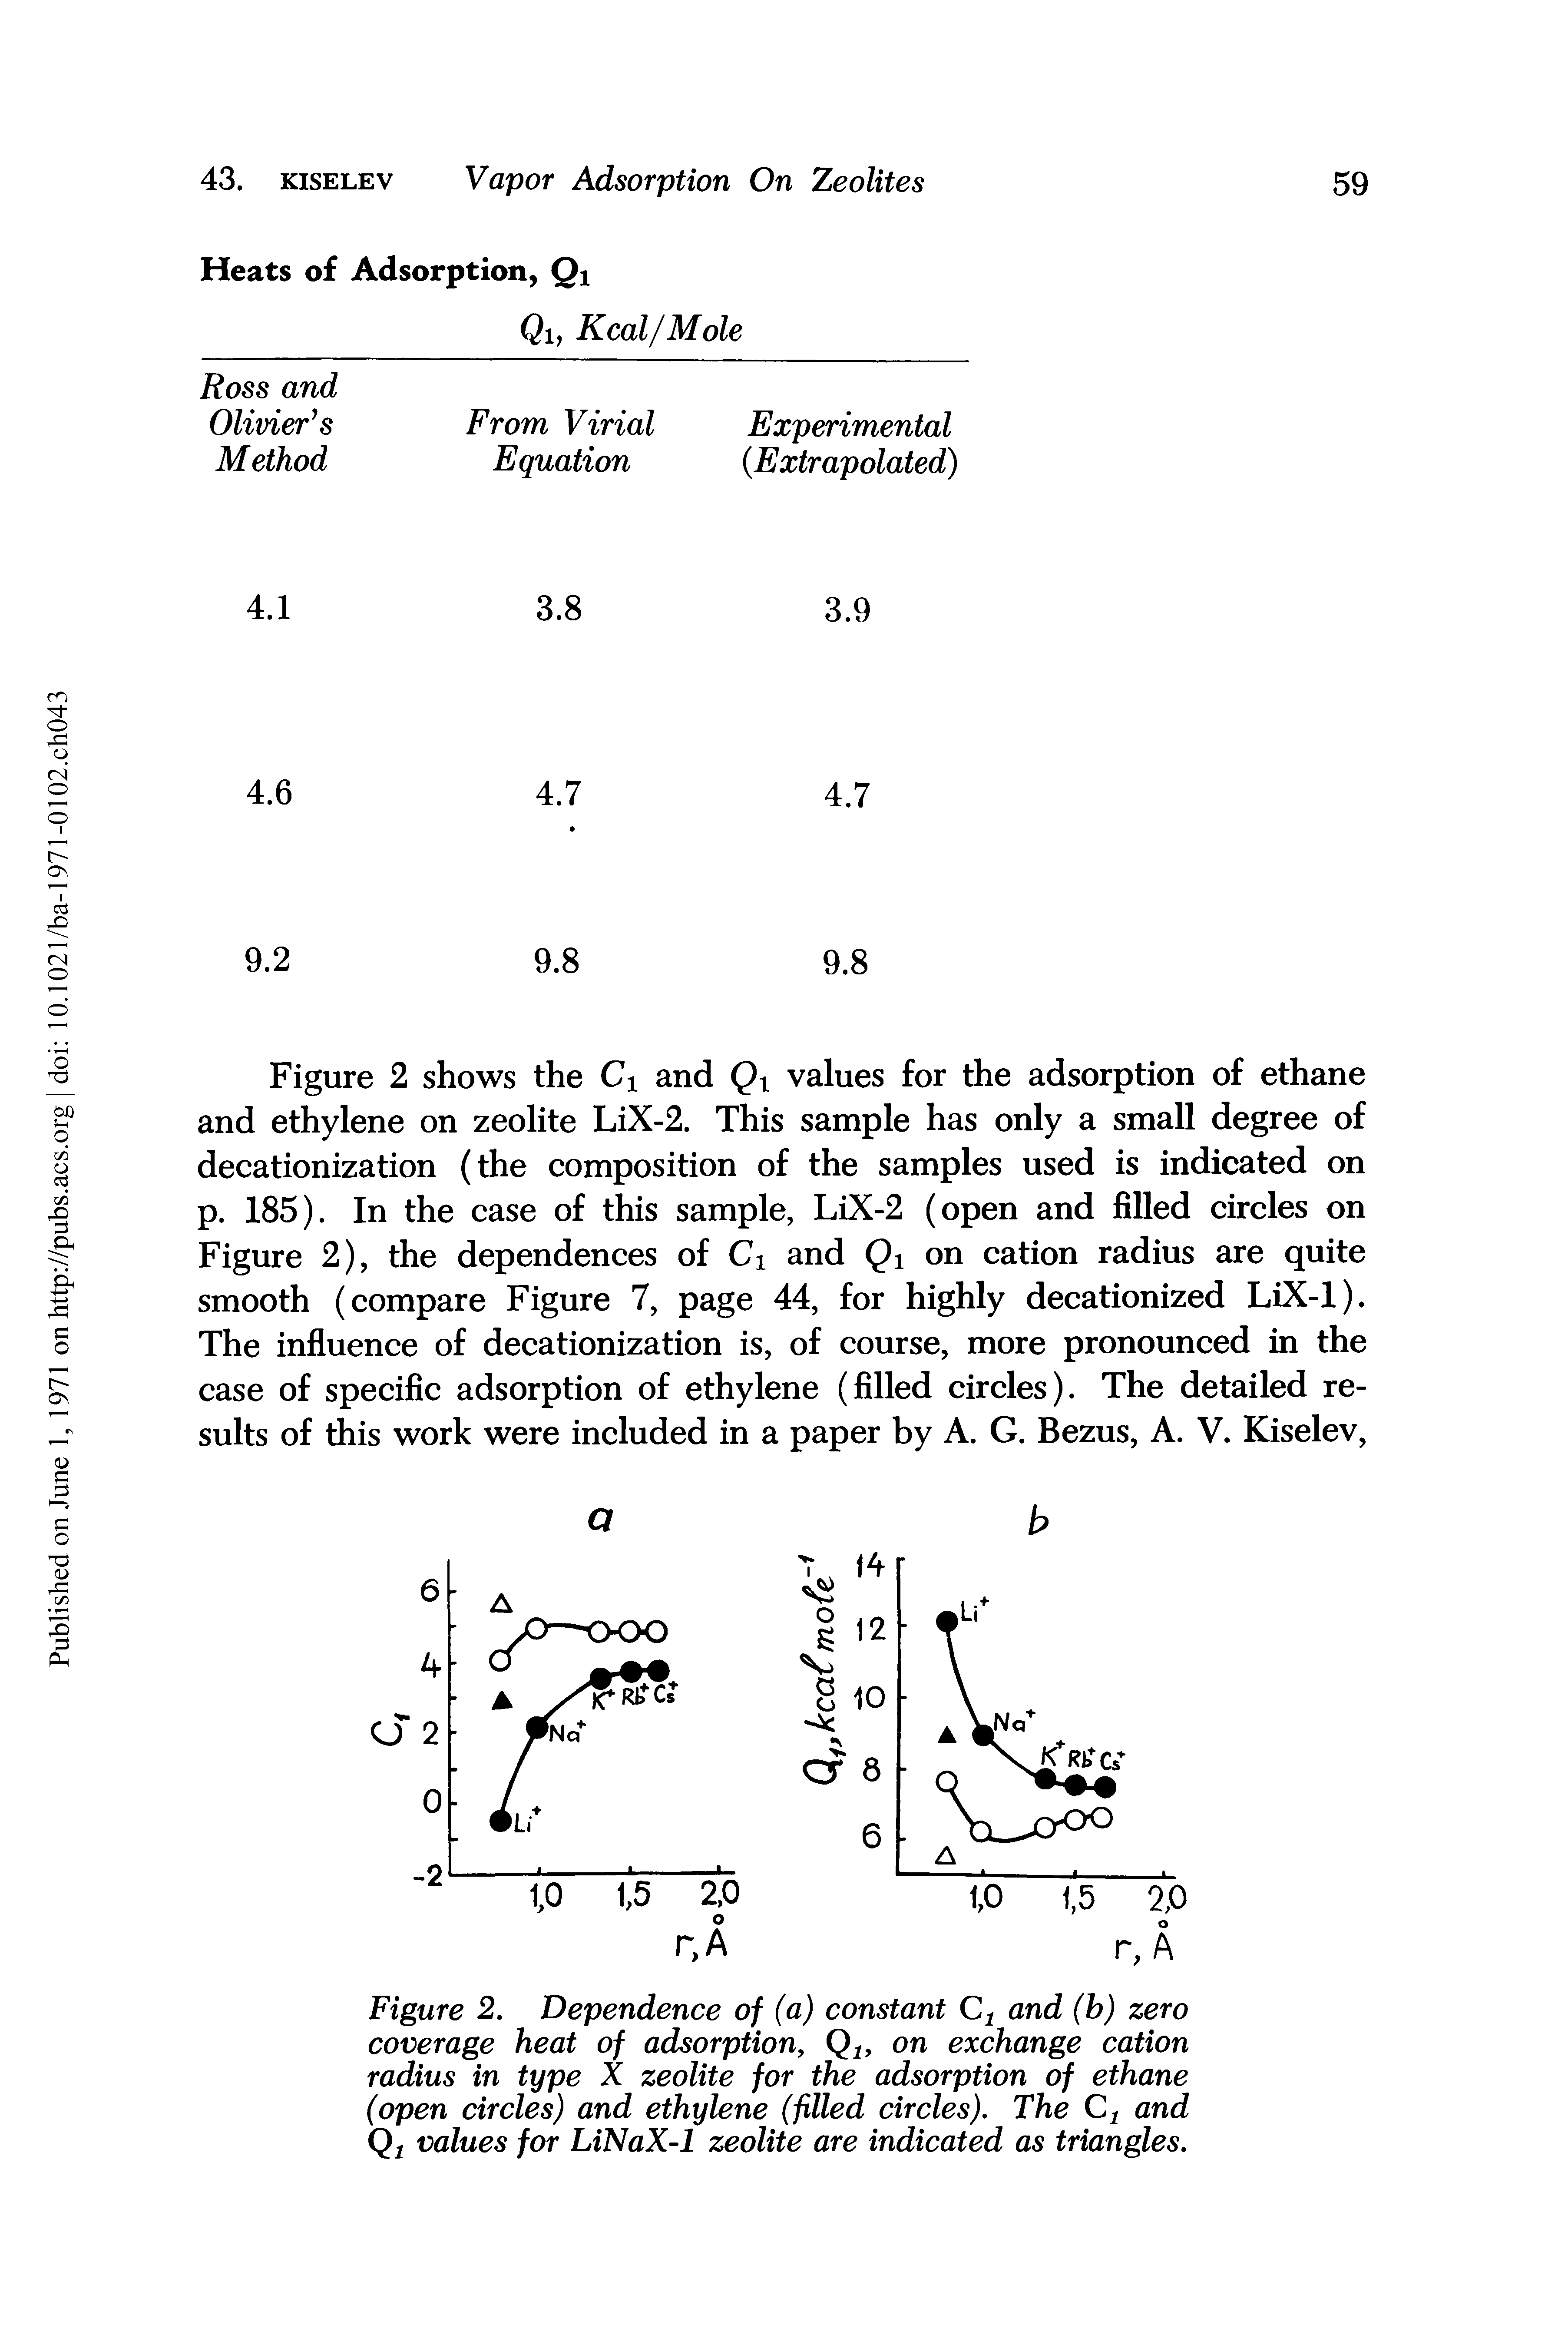 Figure 2. Dependence of (a) constant and (b) zero coverage heat of adsorption Q, on exchange cation radius in type X zeolite for the adsorption of ethane (open circles) and ethylene (filled circles). The and values for LiNaX-1 zeolite are indicated as triangles.